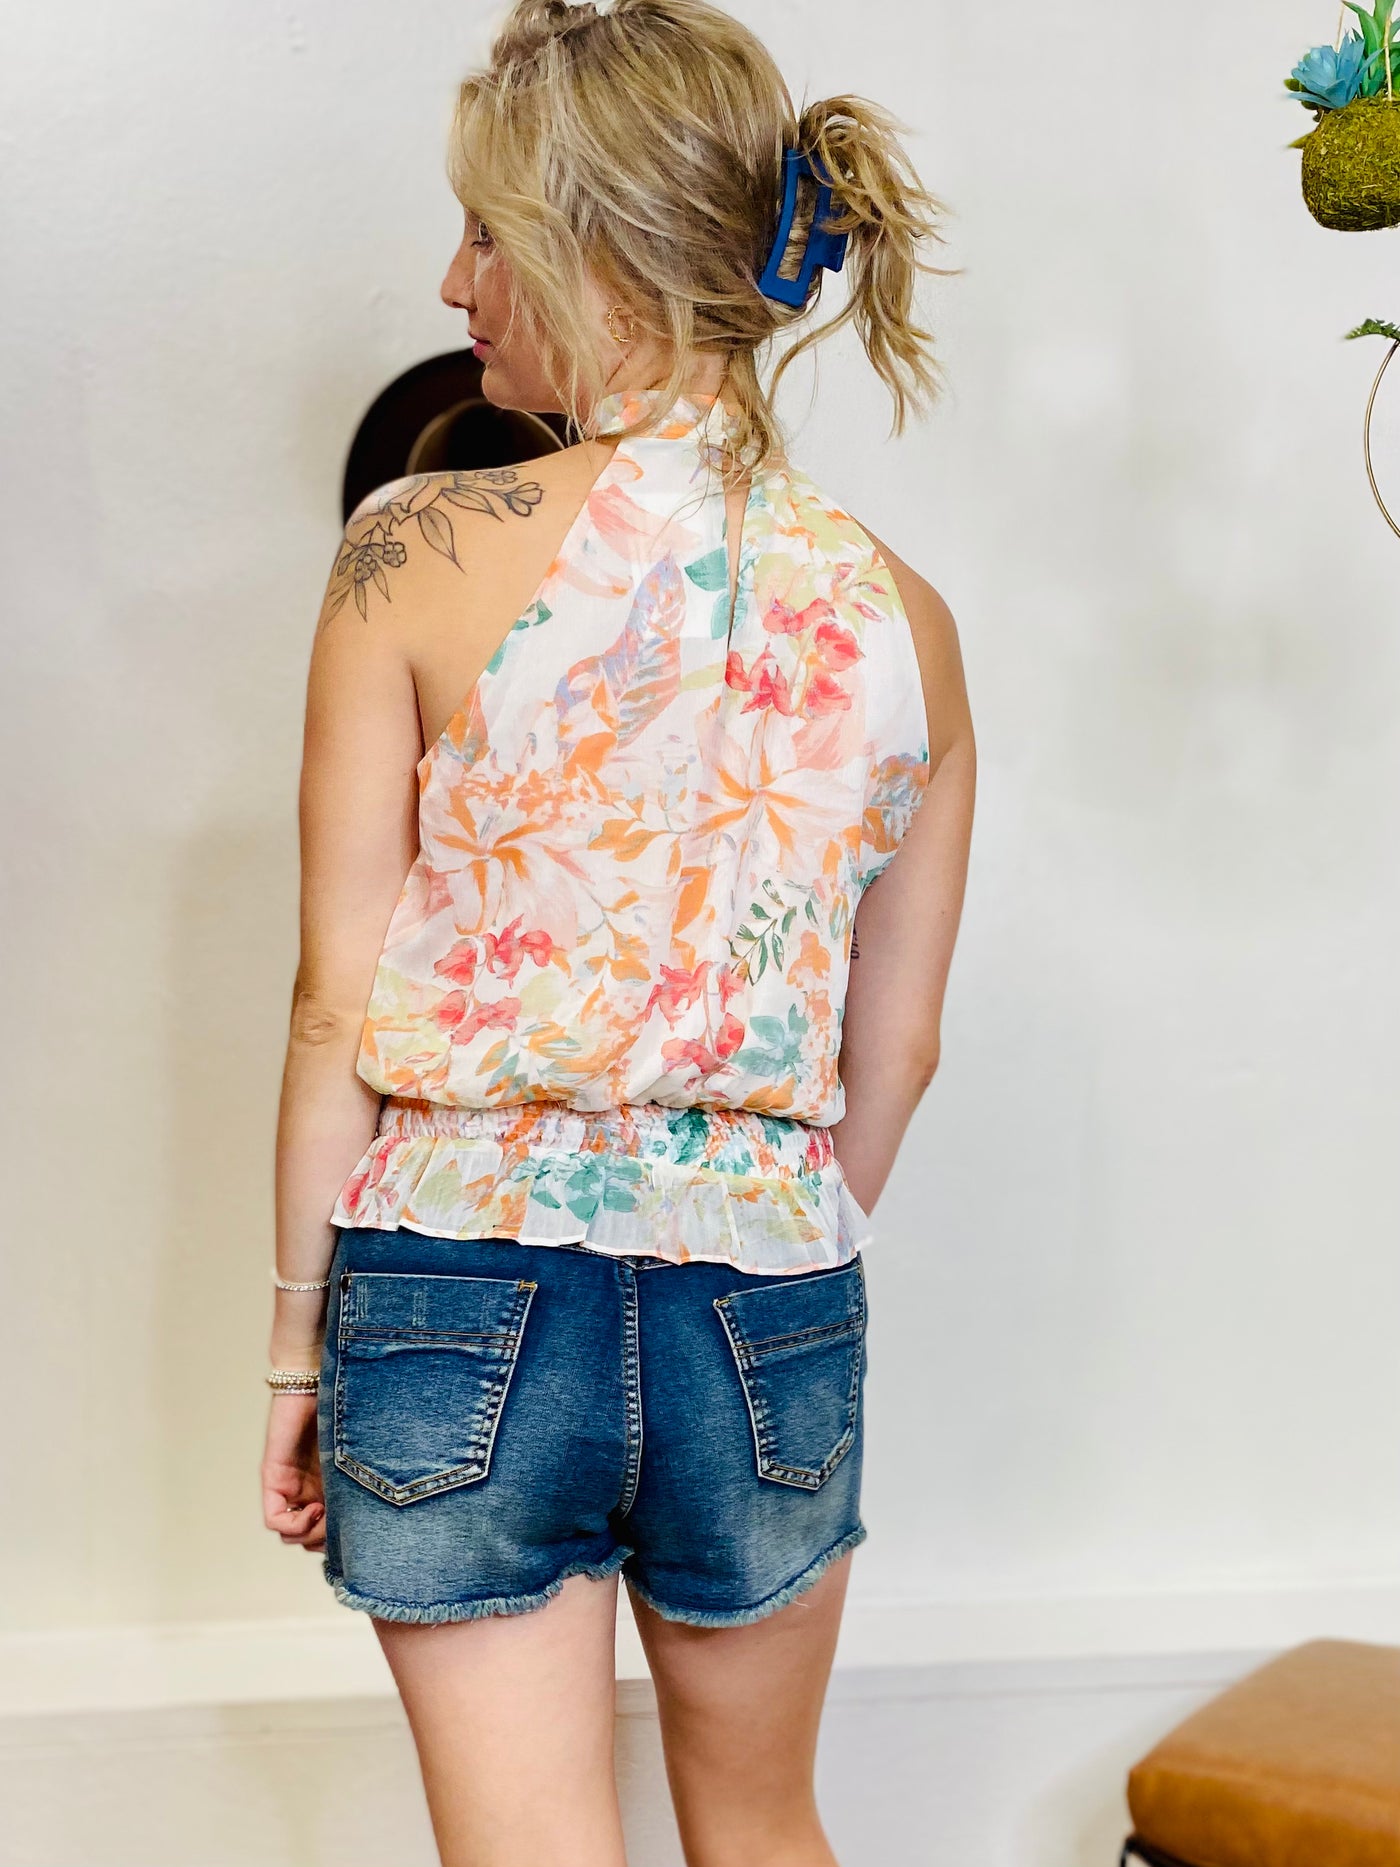 Kyndall Floral Halter Top COLLETTA-Tops-Anatomy Clothing Boutique in Brenham, Texas